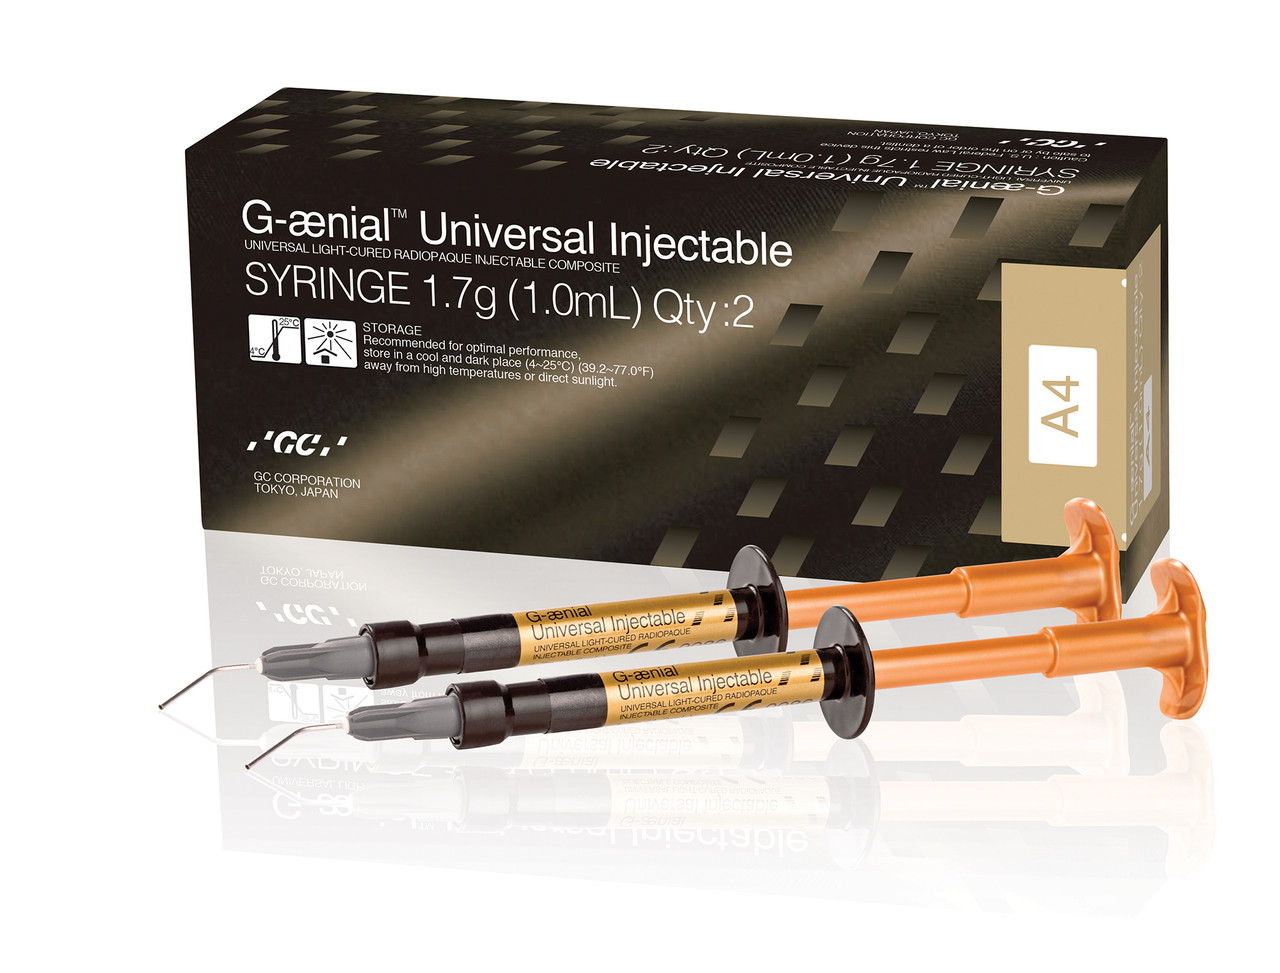 G-aenial Universal Injectable Unitips 15 x 0.16mL AE